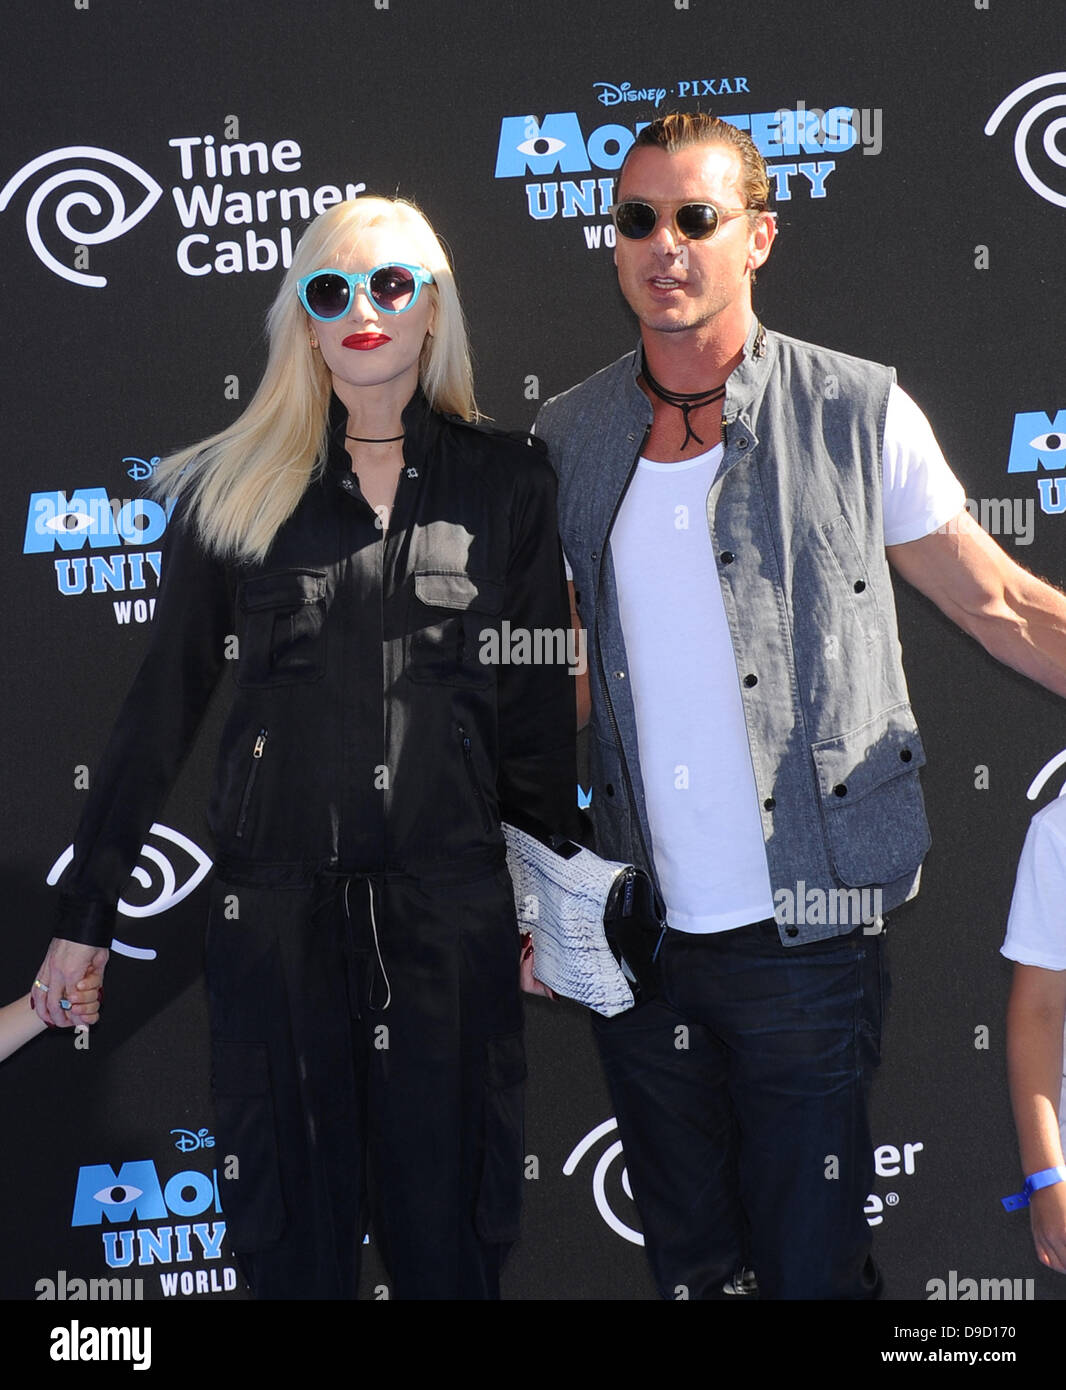 Hollywood, USA. 17th June, 2013. Gwen Stefani, Gavin Rossdale, Kingston and Zuma arrives for the premiere of the film 'Monsters University' at the El Capitan theater. Credit:  ZUMA Press, Inc./Alamy Live News Stock Photo